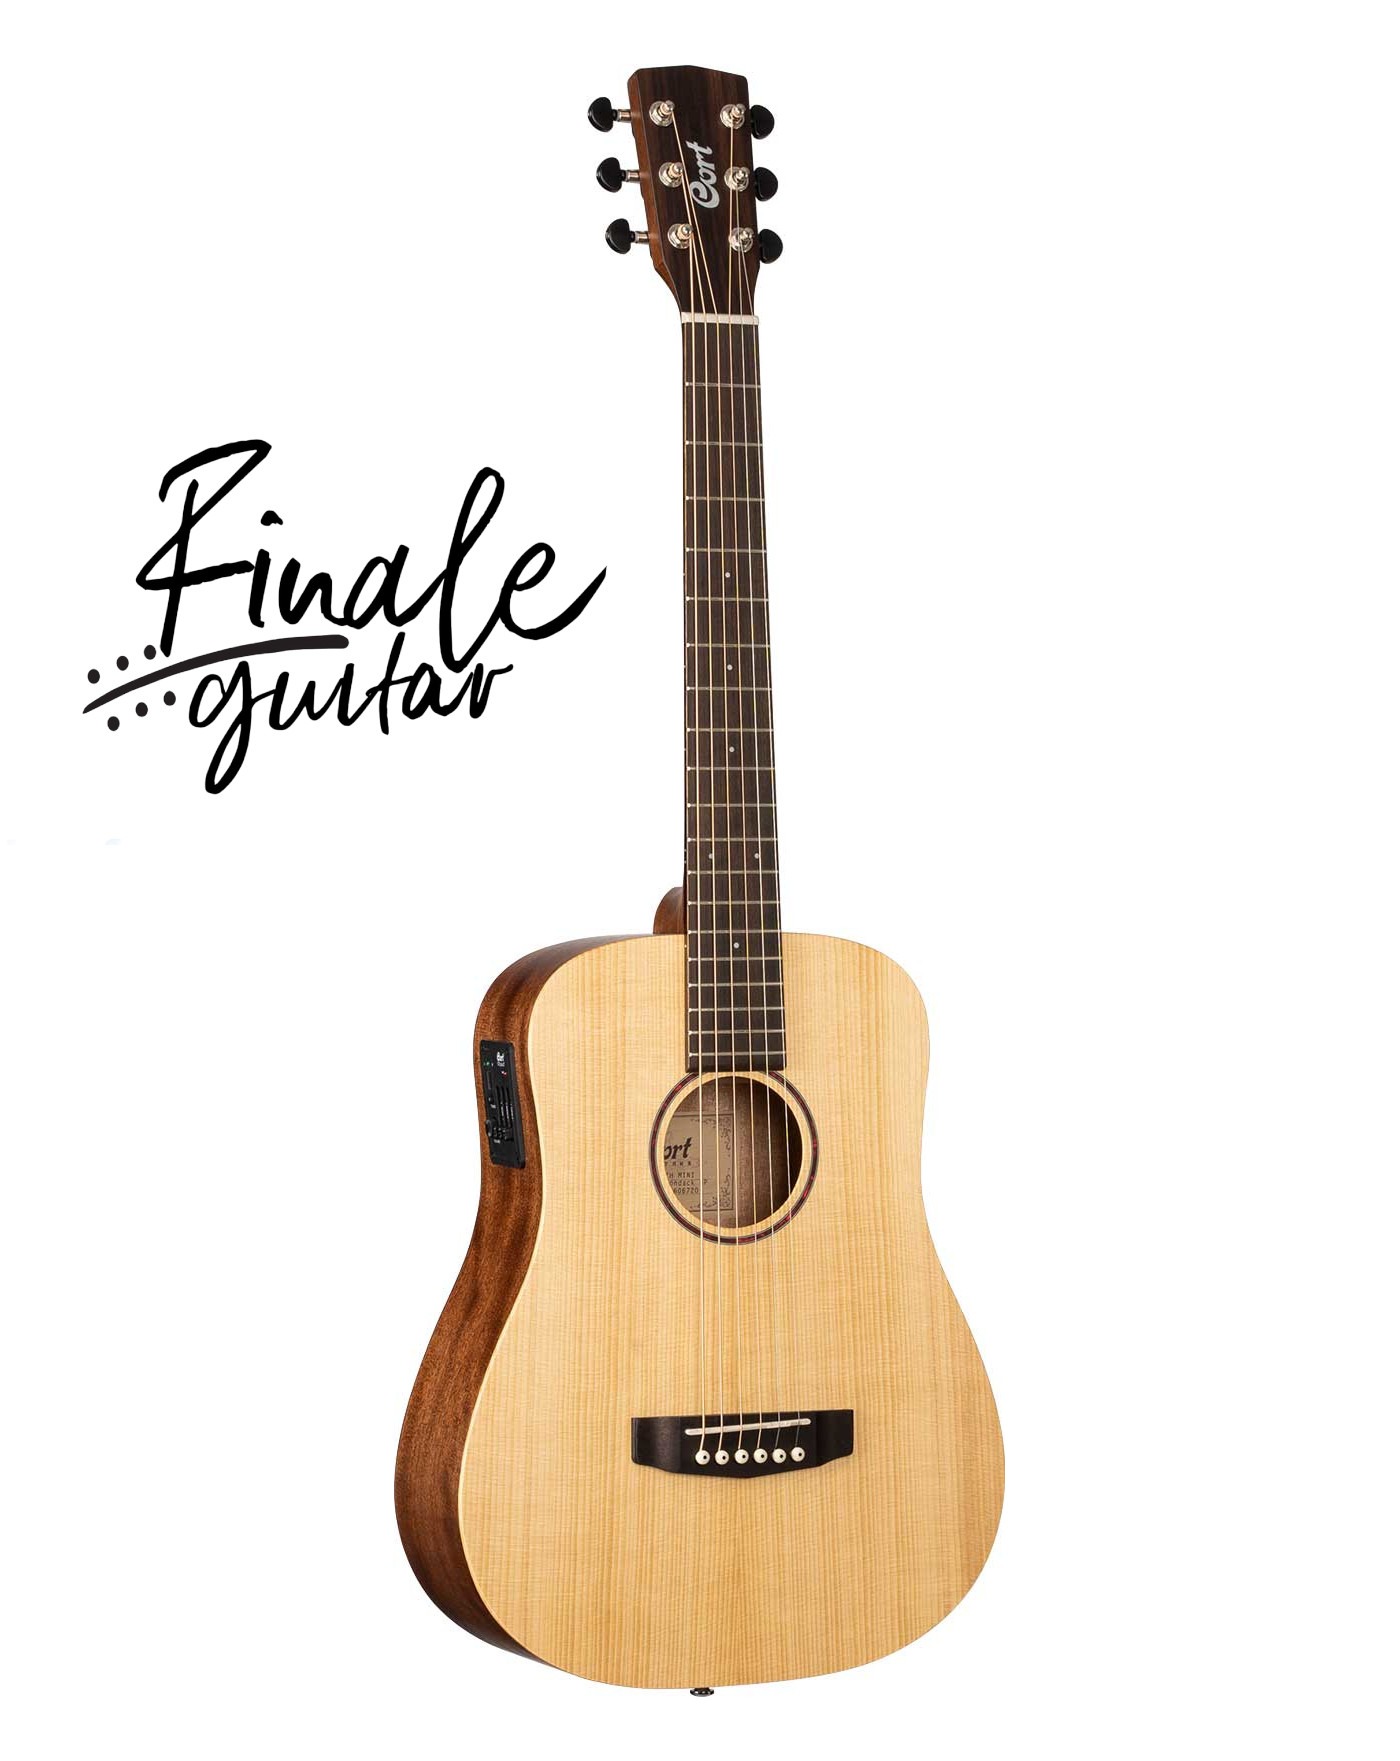 Cort Earth Mini Adirondack electro-acoustic travel guitar for sale in our Sheffield guitar shop, Finale Guitar